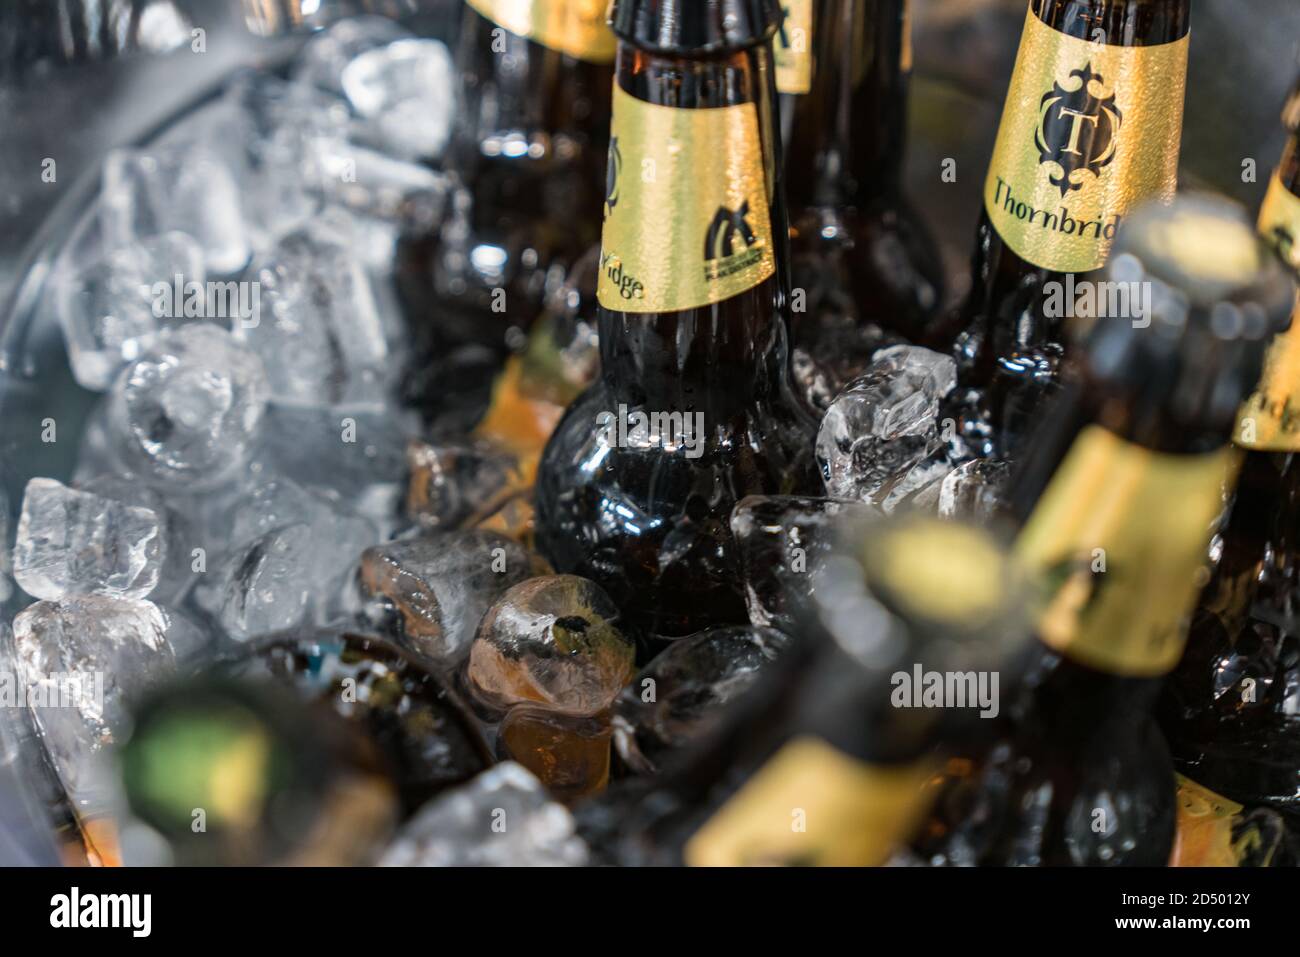 Beer bottles in a large ice bucket Stock Photo